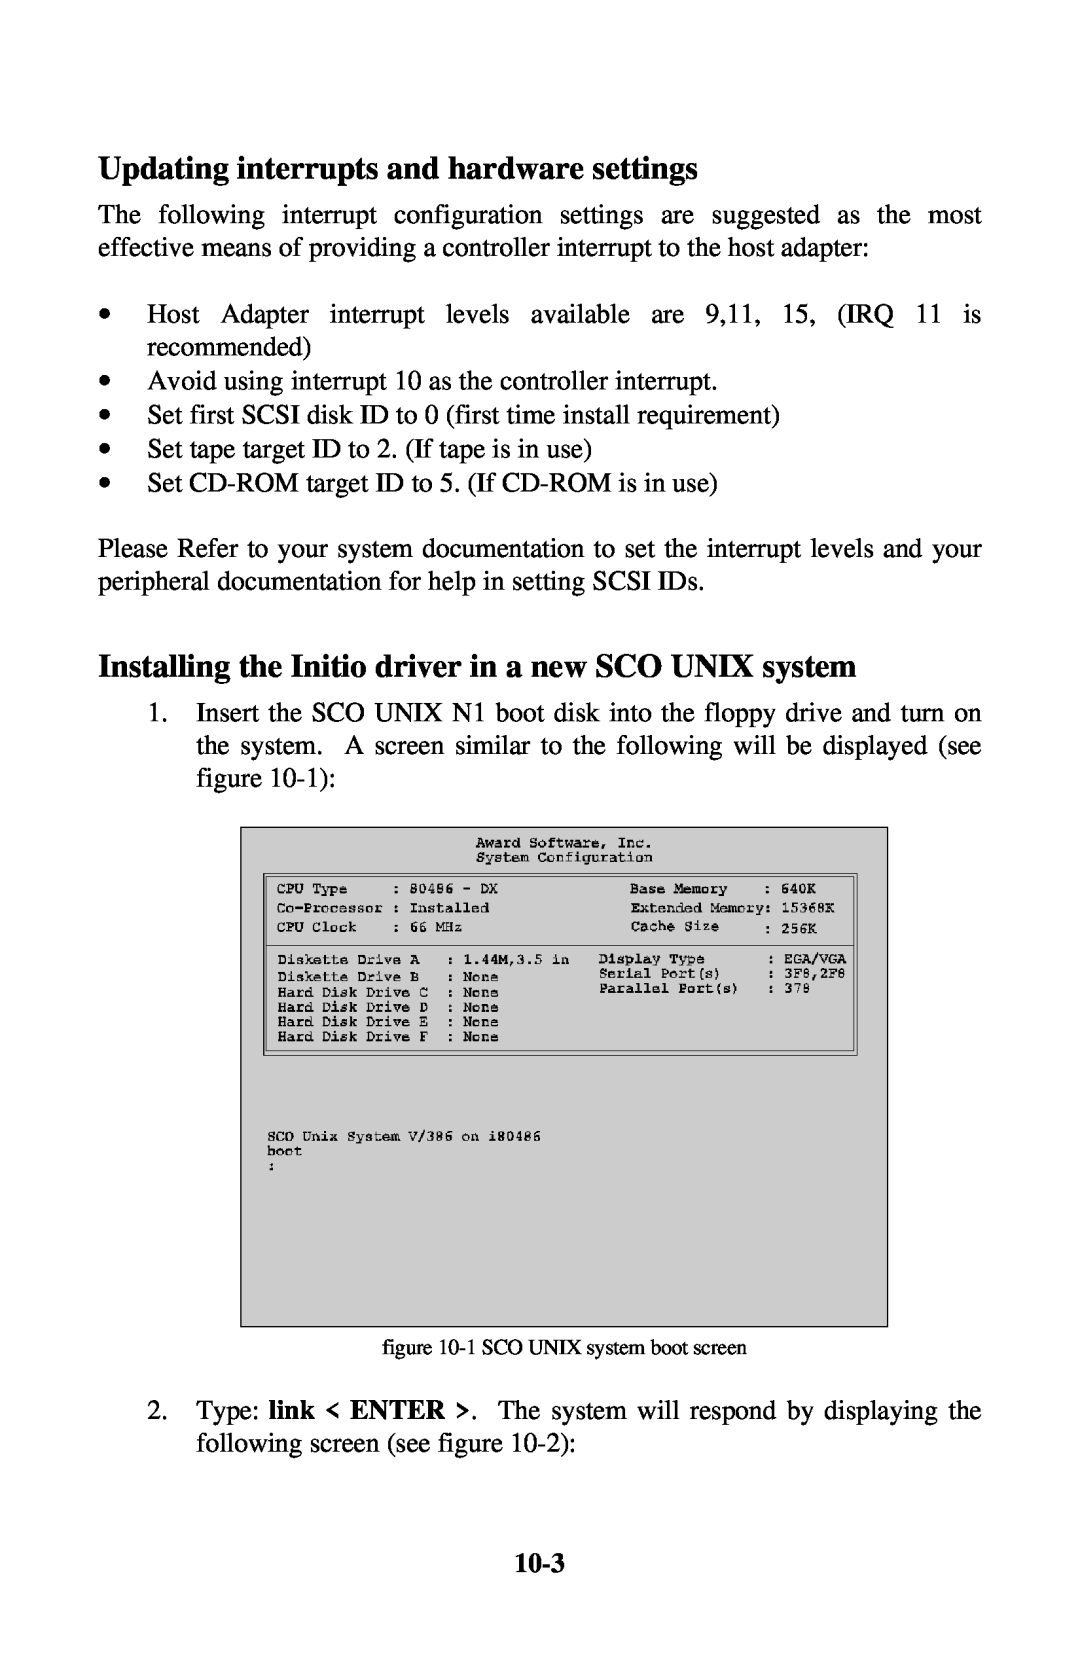 Initio INI-9100U Updating interrupts and hardware settings, Installing the Initio driver in a new SCO UNIX system, 10-3 